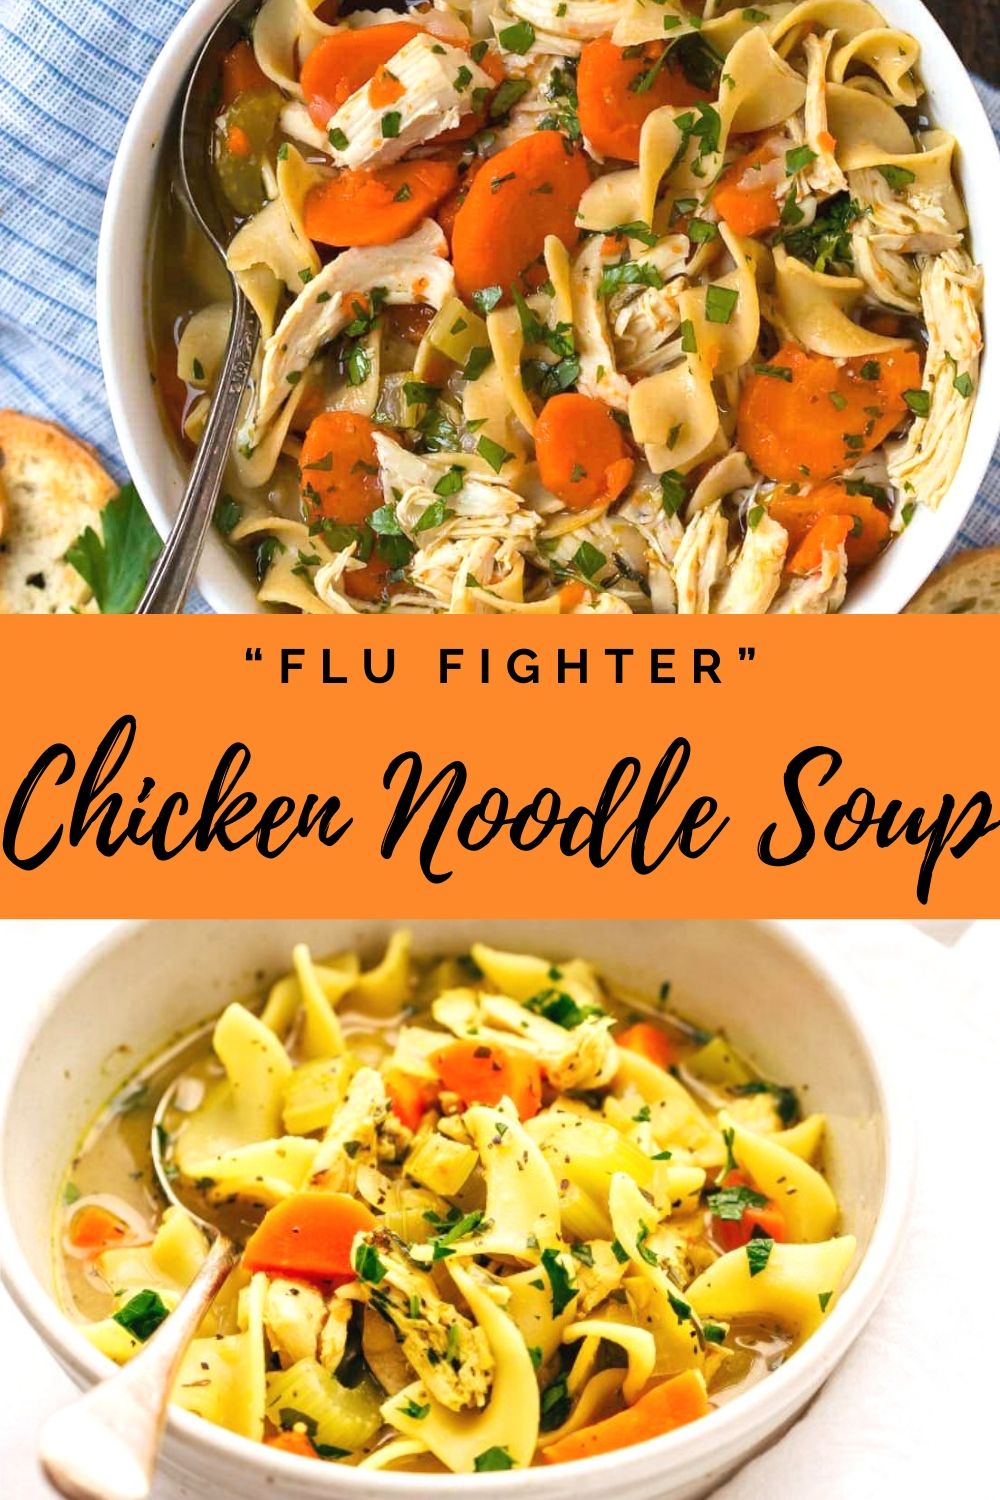 “Flu Fighter” Chicken Noodle Soup | New Recipe